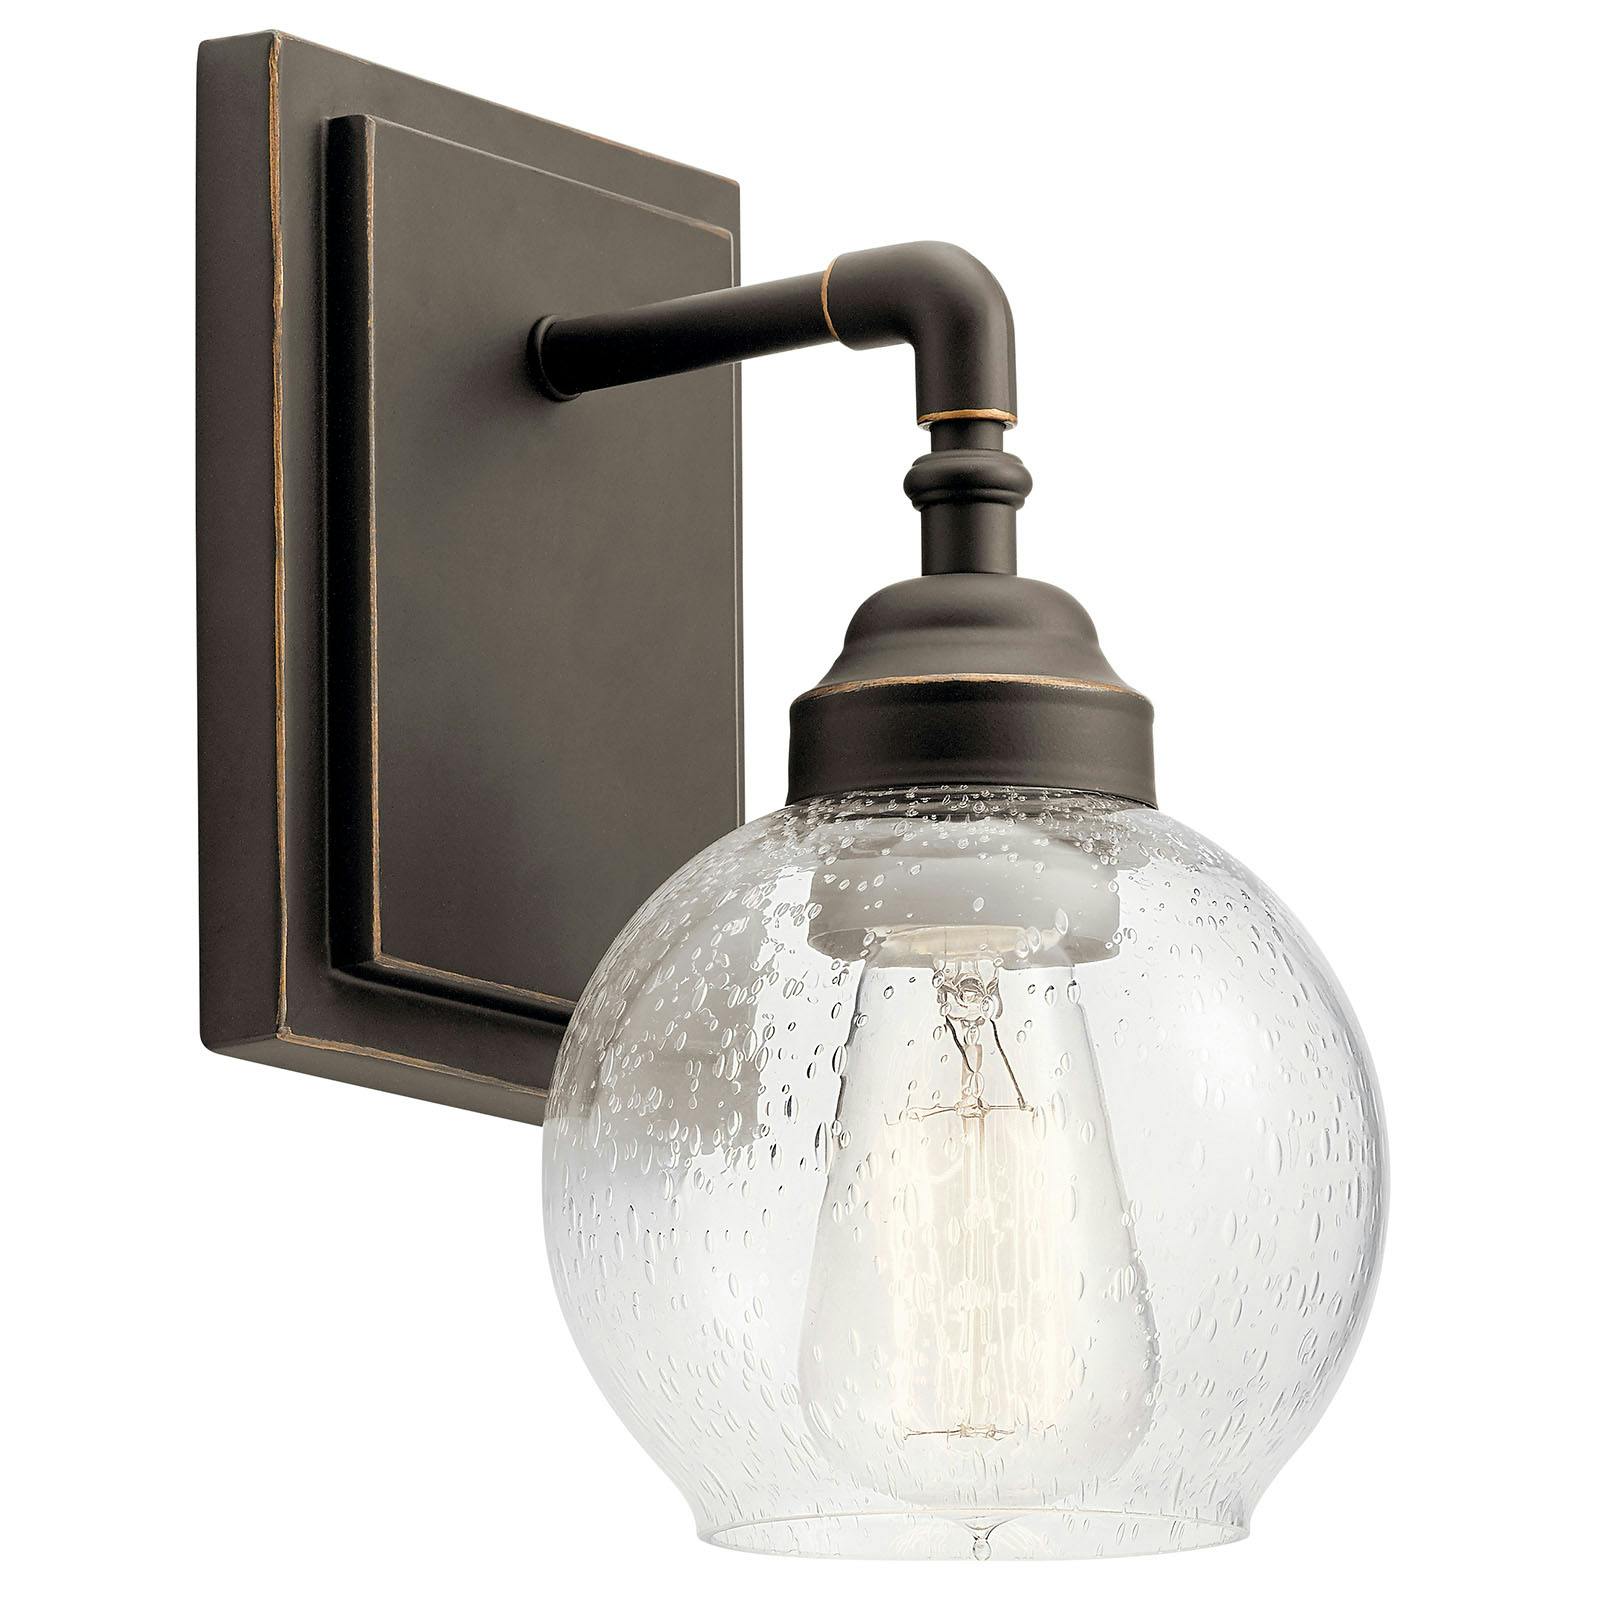 The Niles 1 Light Wall Sconce Olde Bronze® facing down on a white background